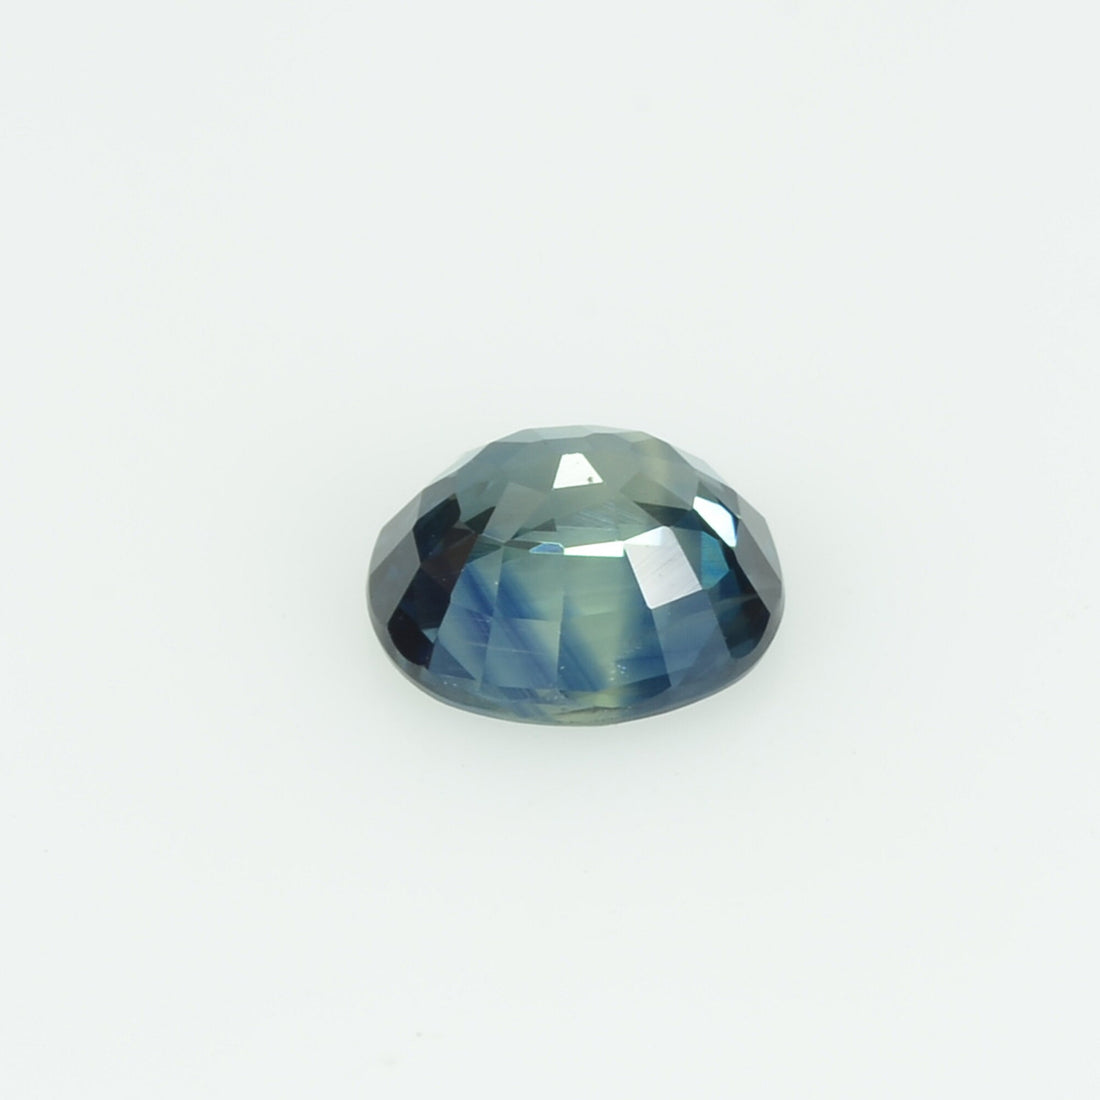 0.81 cts natural blue sapphire loose gemstone oval cut